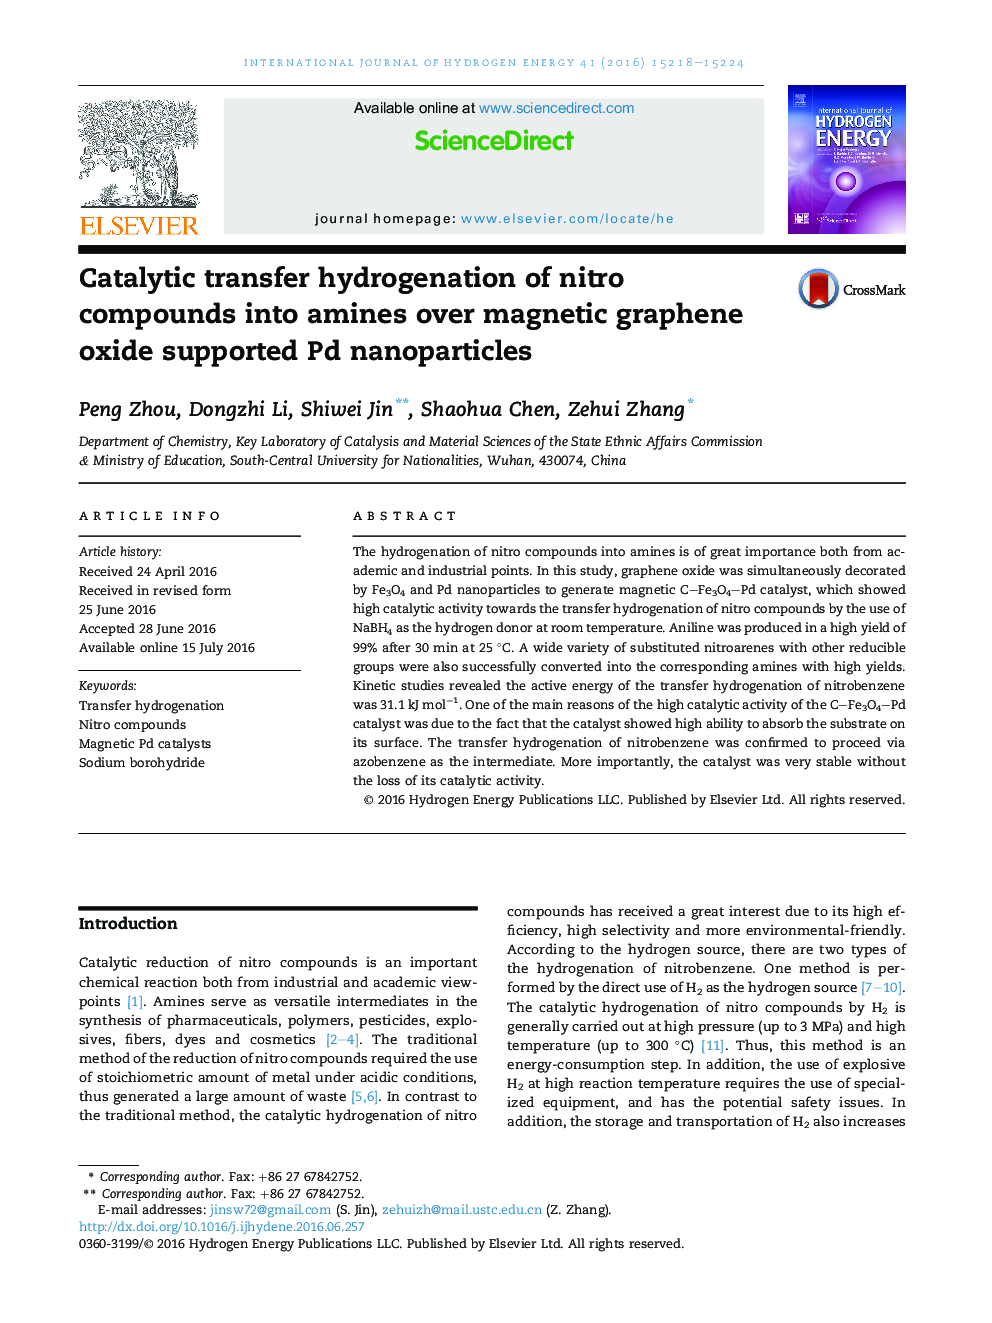 Catalytic transfer hydrogenation of nitro compounds into amines over magnetic graphene oxide supported Pd nanoparticles